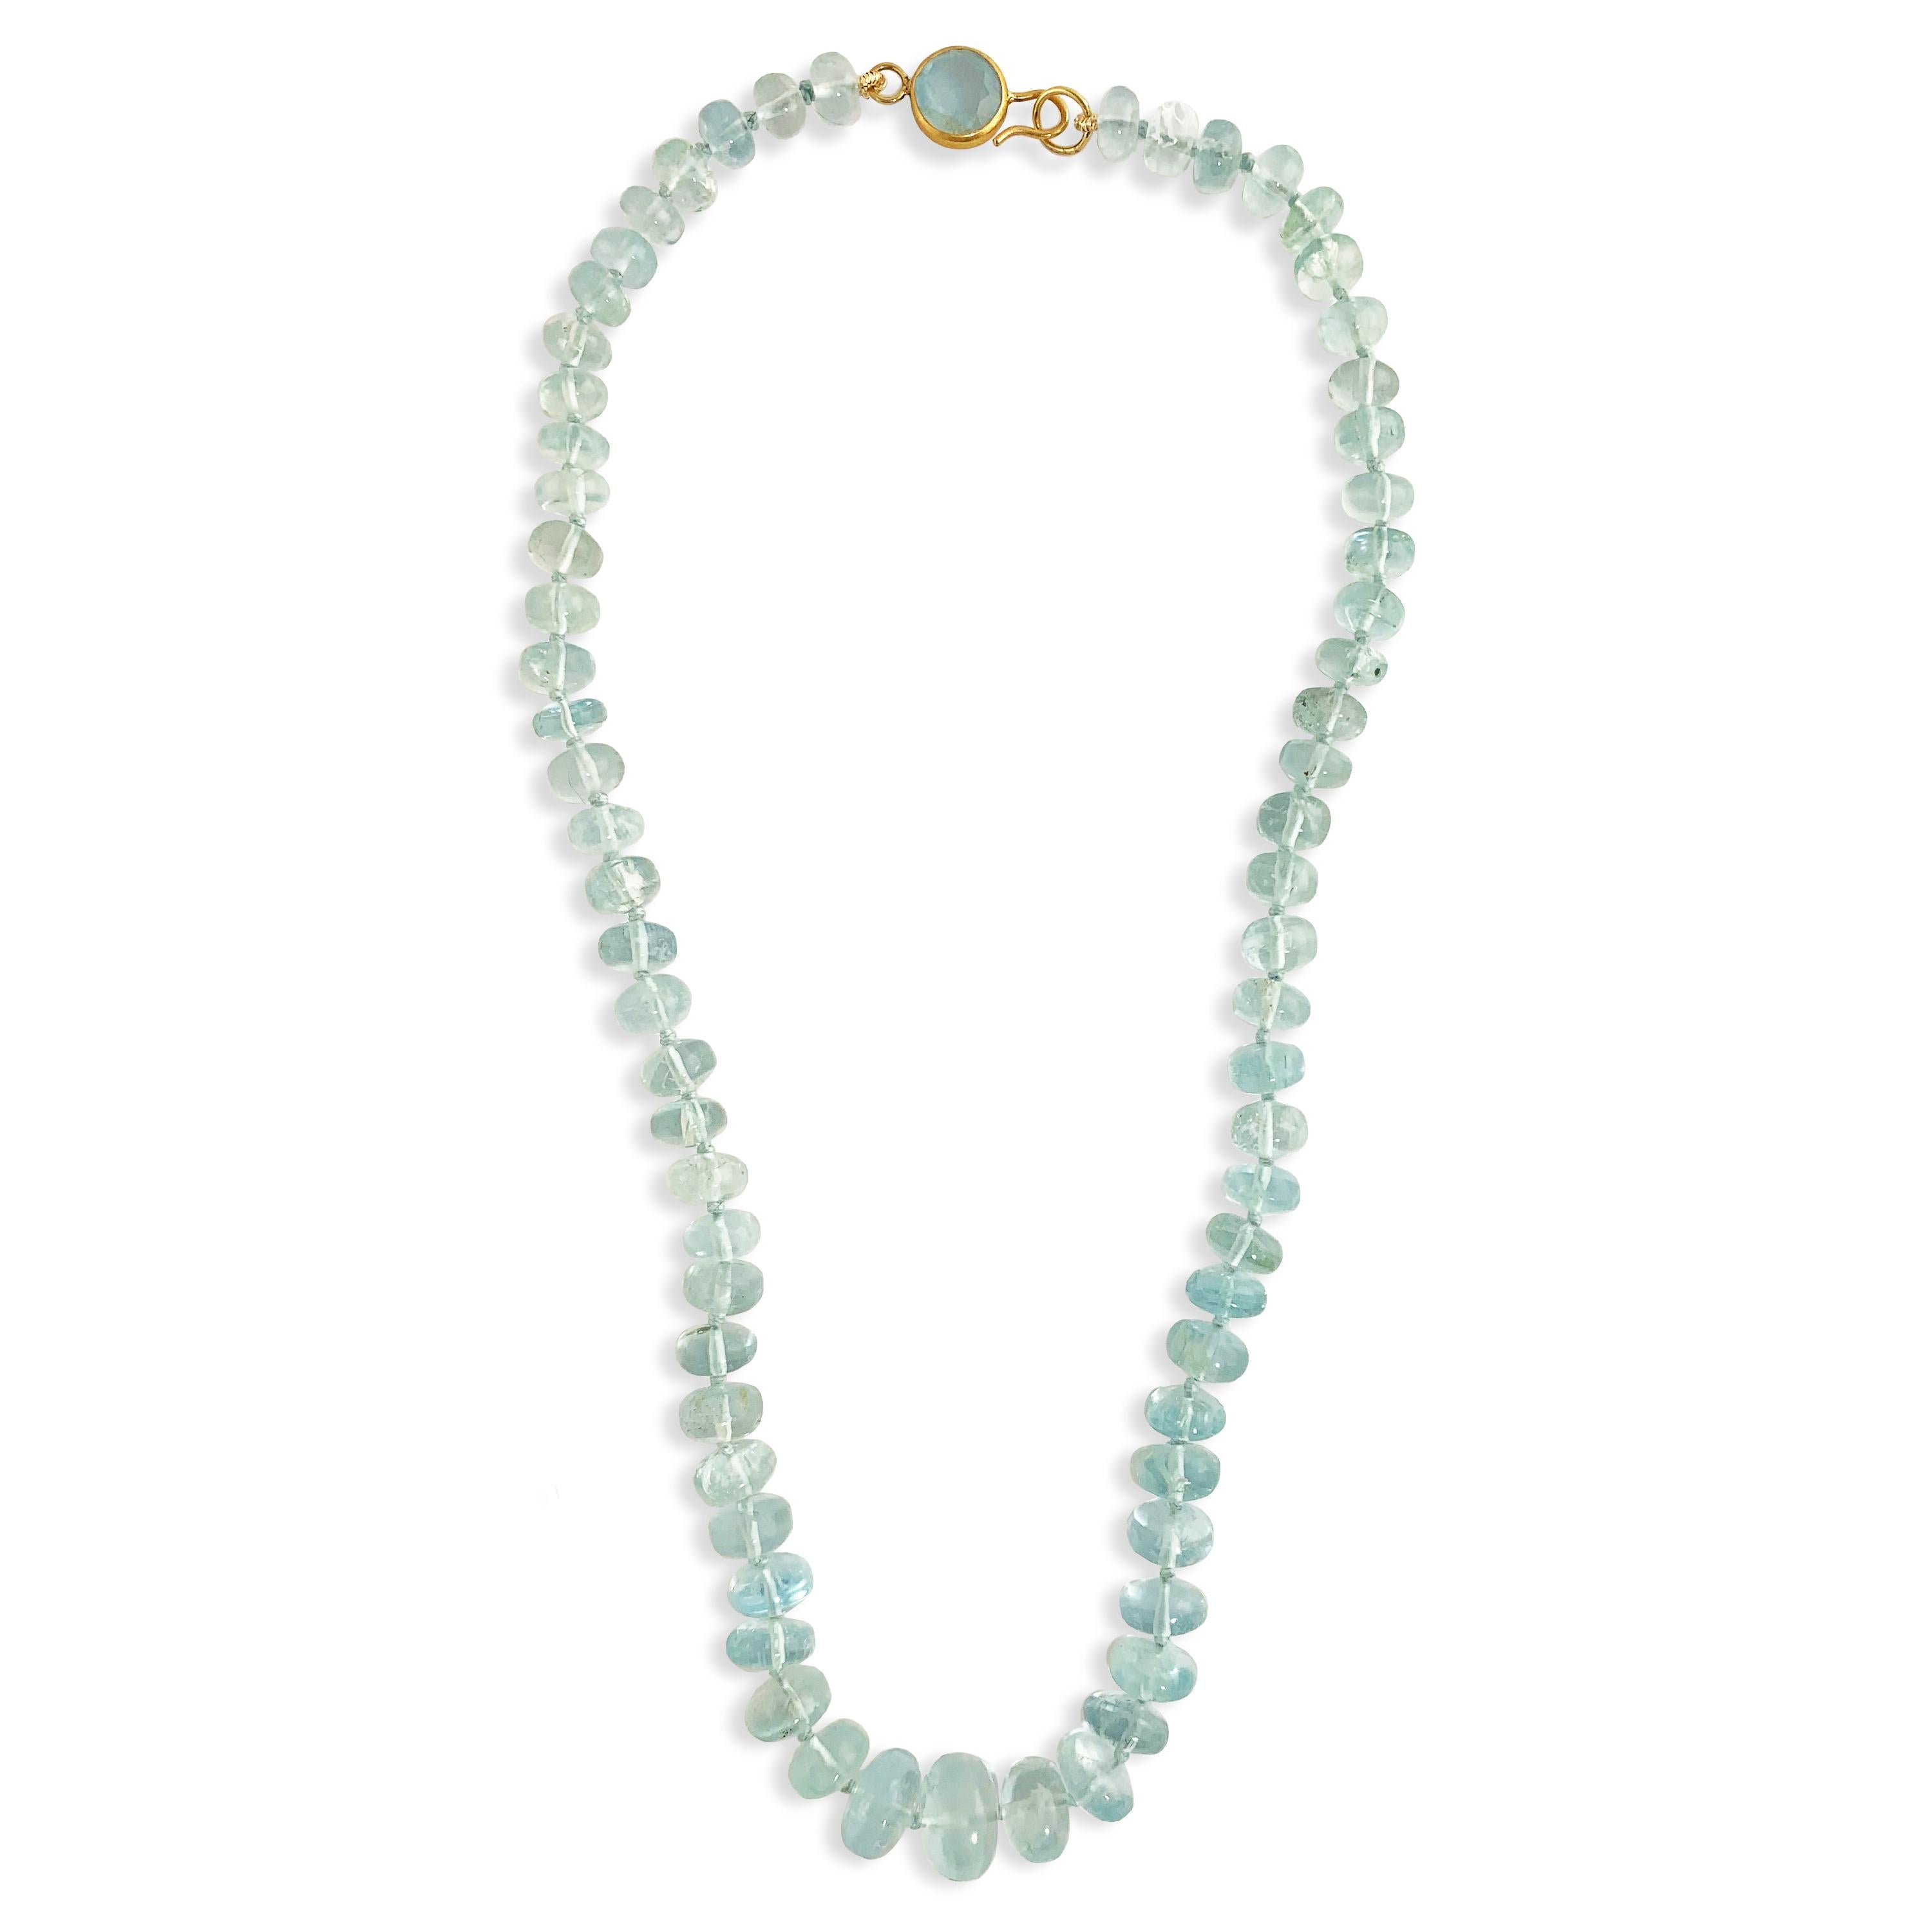 Dreamy Aquamarine Beaded Necklace with 22k gold clasp.  AAA Aquamarine beads measuring 6mm to 9mm and can be worn two ways;  with the clasp in front or behind.  Perfect alone or with paired with other necklaces.
Aquamarine is the birthstone for the